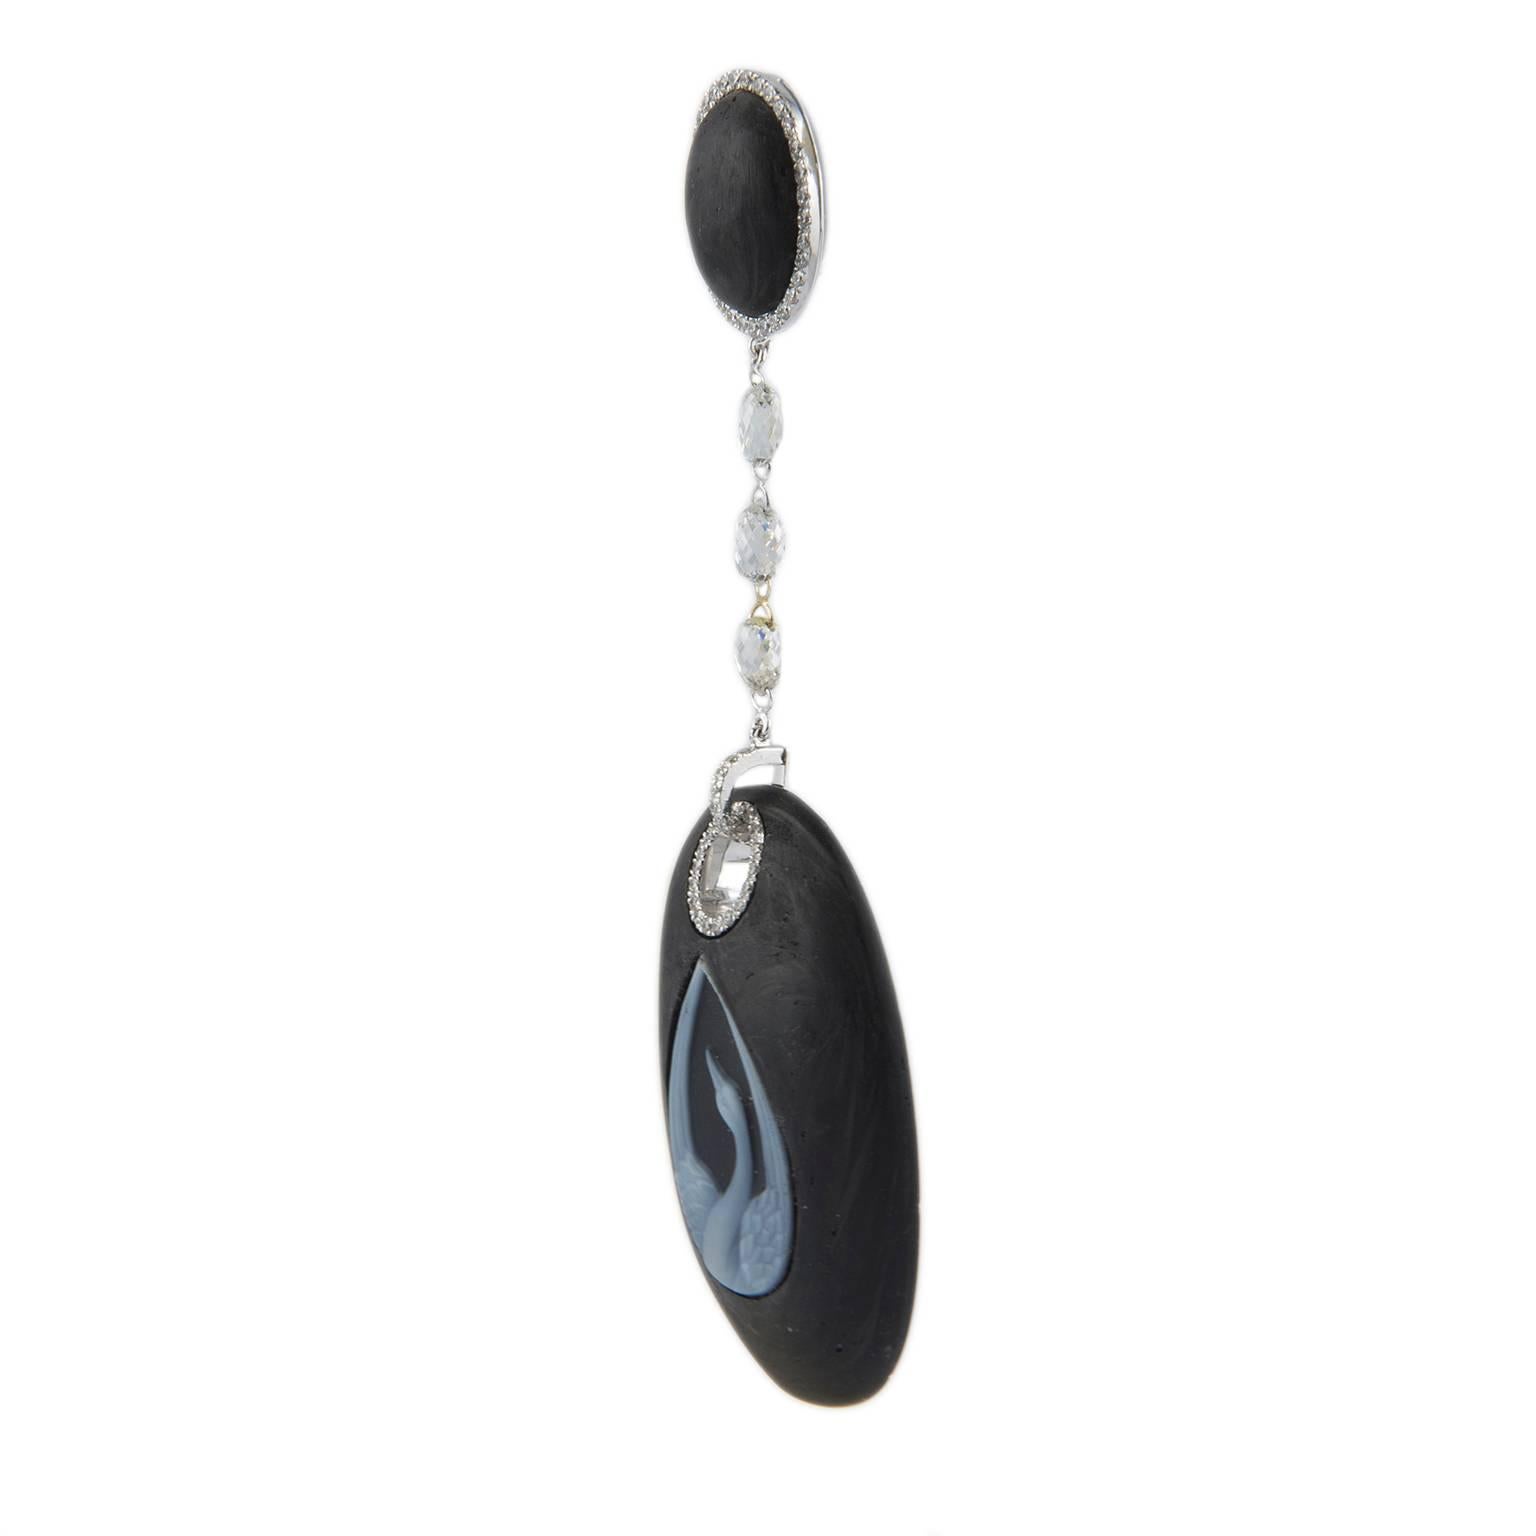 Very special carbon earrings with an agate cameo representing a wonderful swan, supported by briolette cut diamonds. To embellish the details brilliant cut white diamonds, all mounted on 18KT white gold. Briolette cut
Diamonds  for a total 2.05 ct.
